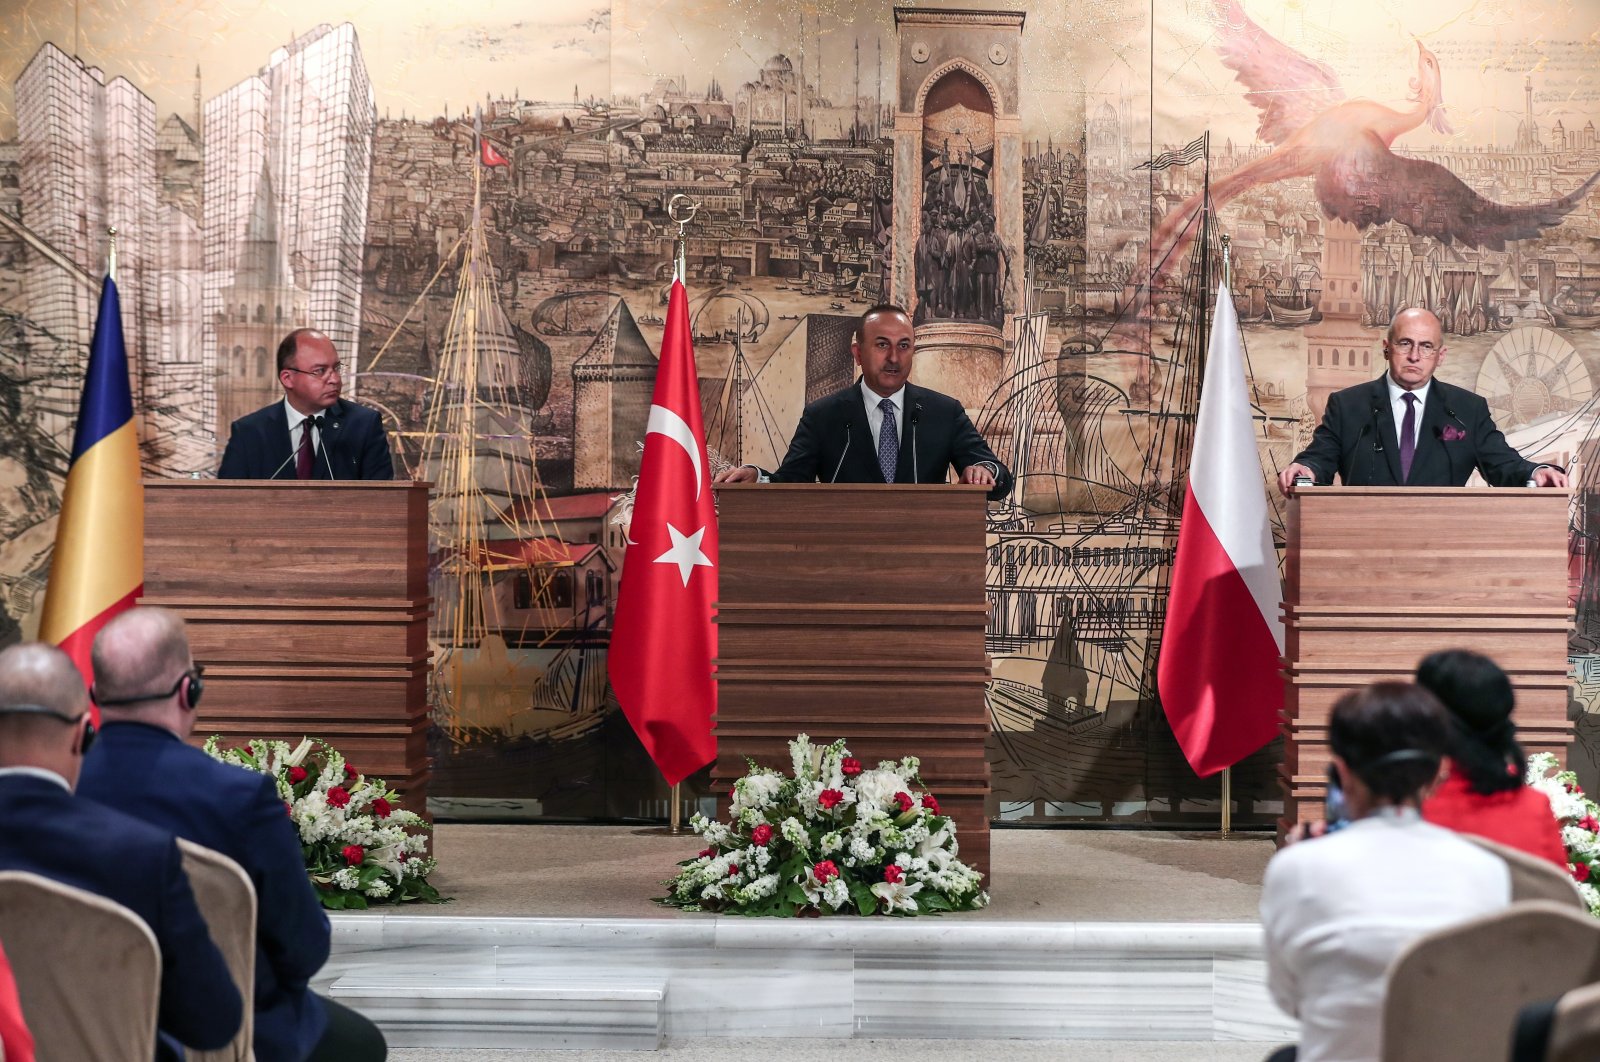 Foreign Minister Mevlüt Çavuşoğlu (C), Polish Foreign Minister Zbigniew Rau (R) and Romanian Foreign Minister Bogdan Aurescu (L) hold their trilateral foreign ministers press conference in Istanbul, Turkey, 27 May 2022. (EPA)